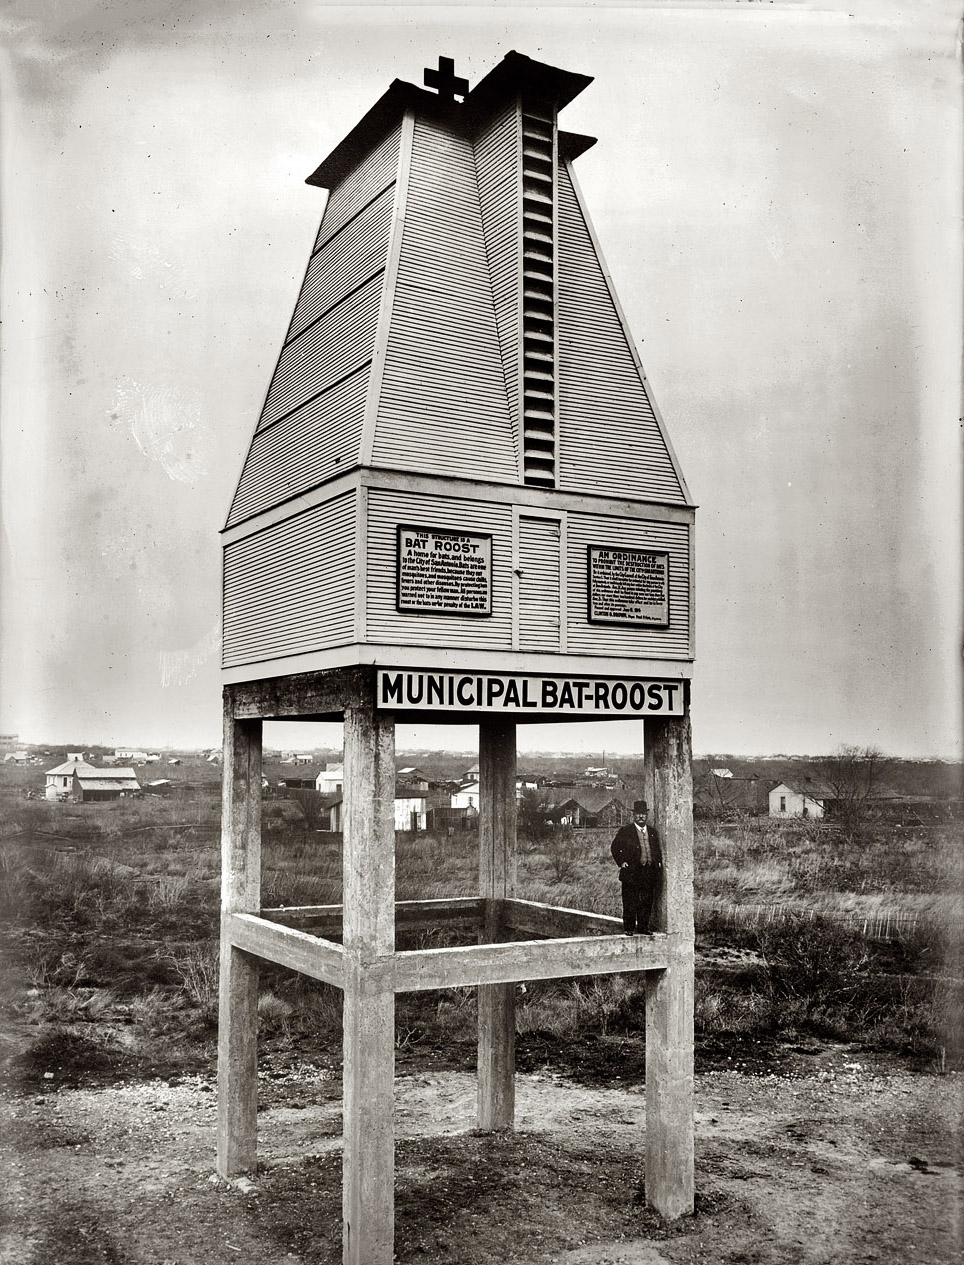 1914. Dr. Charles Campbell and a "municipal bat-roost" in San Antonio, Texas ("for one of man's best friends"), his idea for mosquito control at a time when malaria was a major public health problem in the U.S. Disguised as a favorite bat habitat — a church steeple, complete with cross — the roost was fitted with a trapdoor and stilts to facilitate the harvesting of guano by the wagonload for use as fertilizer. 5x7 glass negative, Bain News Service. View full size.